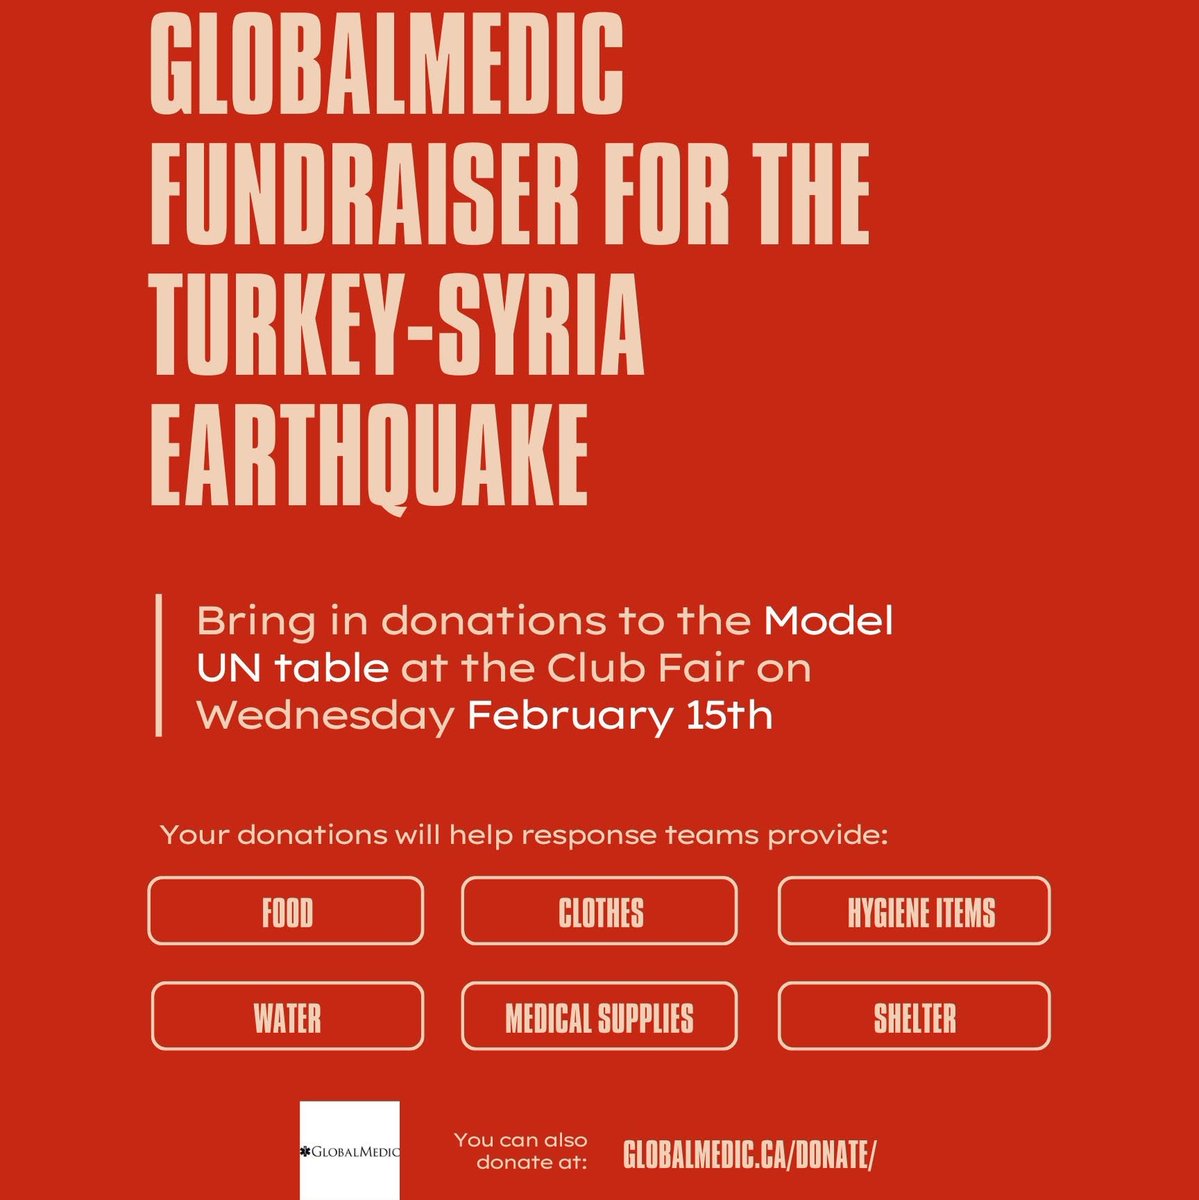 Today is Day 3 of Social Justice Week, and the theme is Equality. The Model UN club is accepting donations in support of the GlobalMedic Fundraiser for the Turkey-Syria earthquake.